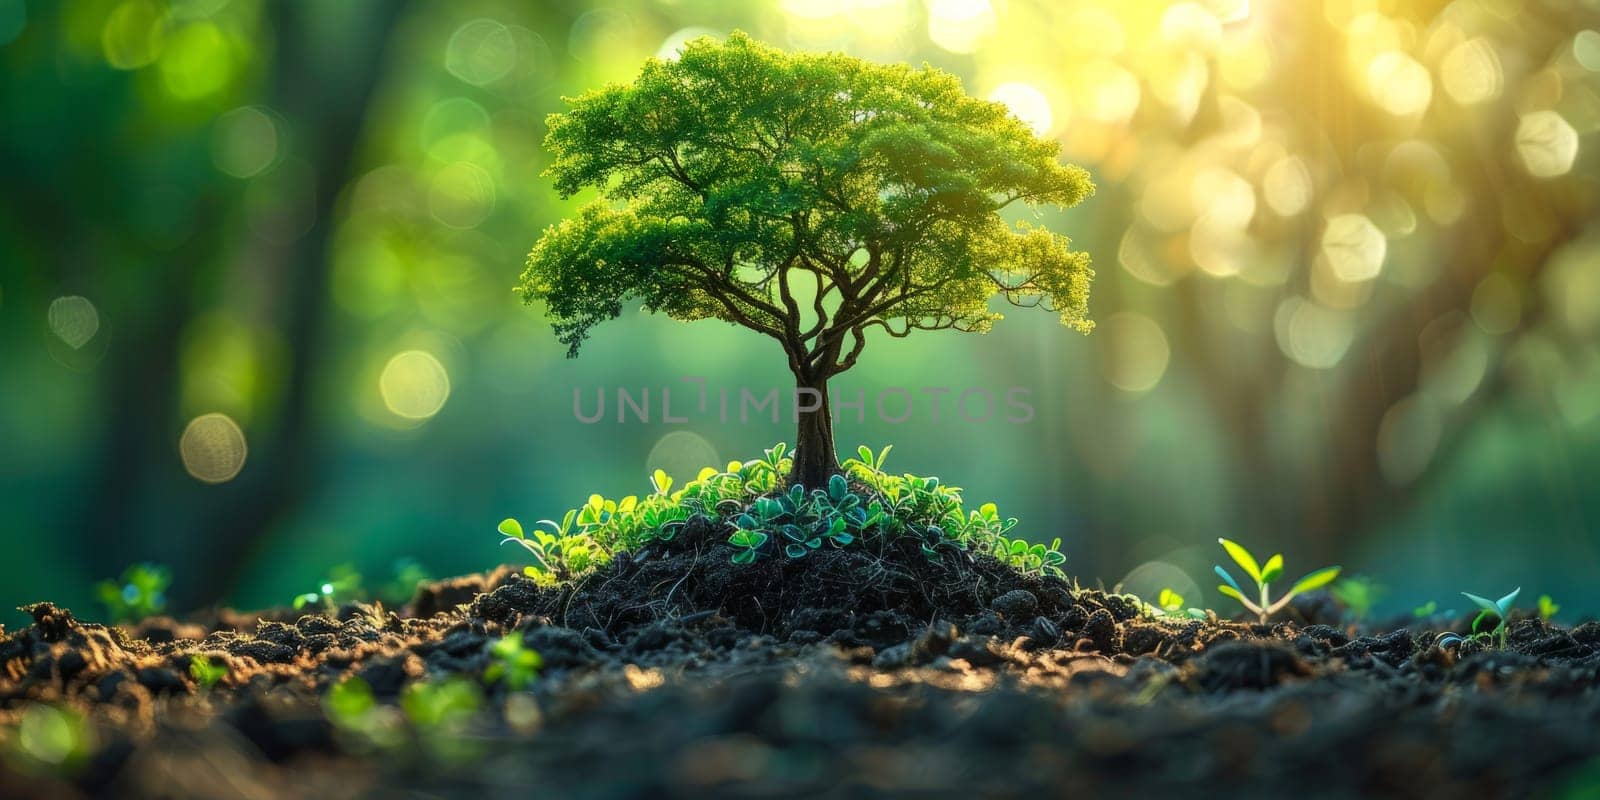 Vibrant nature scene with miniature tree growing on forest floor. Concept of environmental conservation, sustainable growth, and ecological balance.